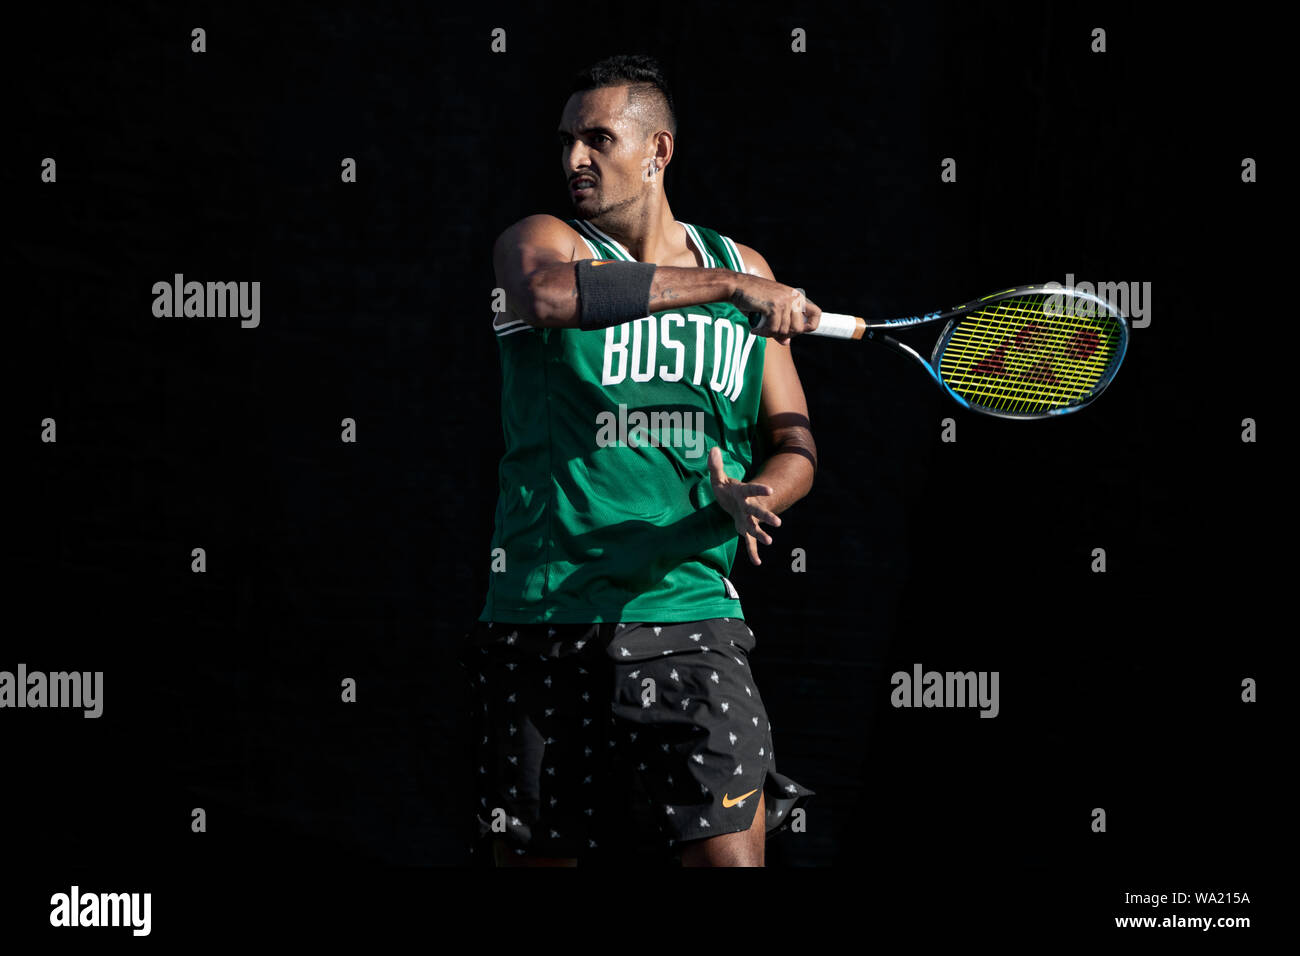 Montreal - AUGUST 5. Nick Kyrgios, professional tennis player hitting awesome forehand during practice at ATP Tour Masters 1000 tournament, Canada Open aka Rogers Cup in Montreal August 5 2019. Stock Photo